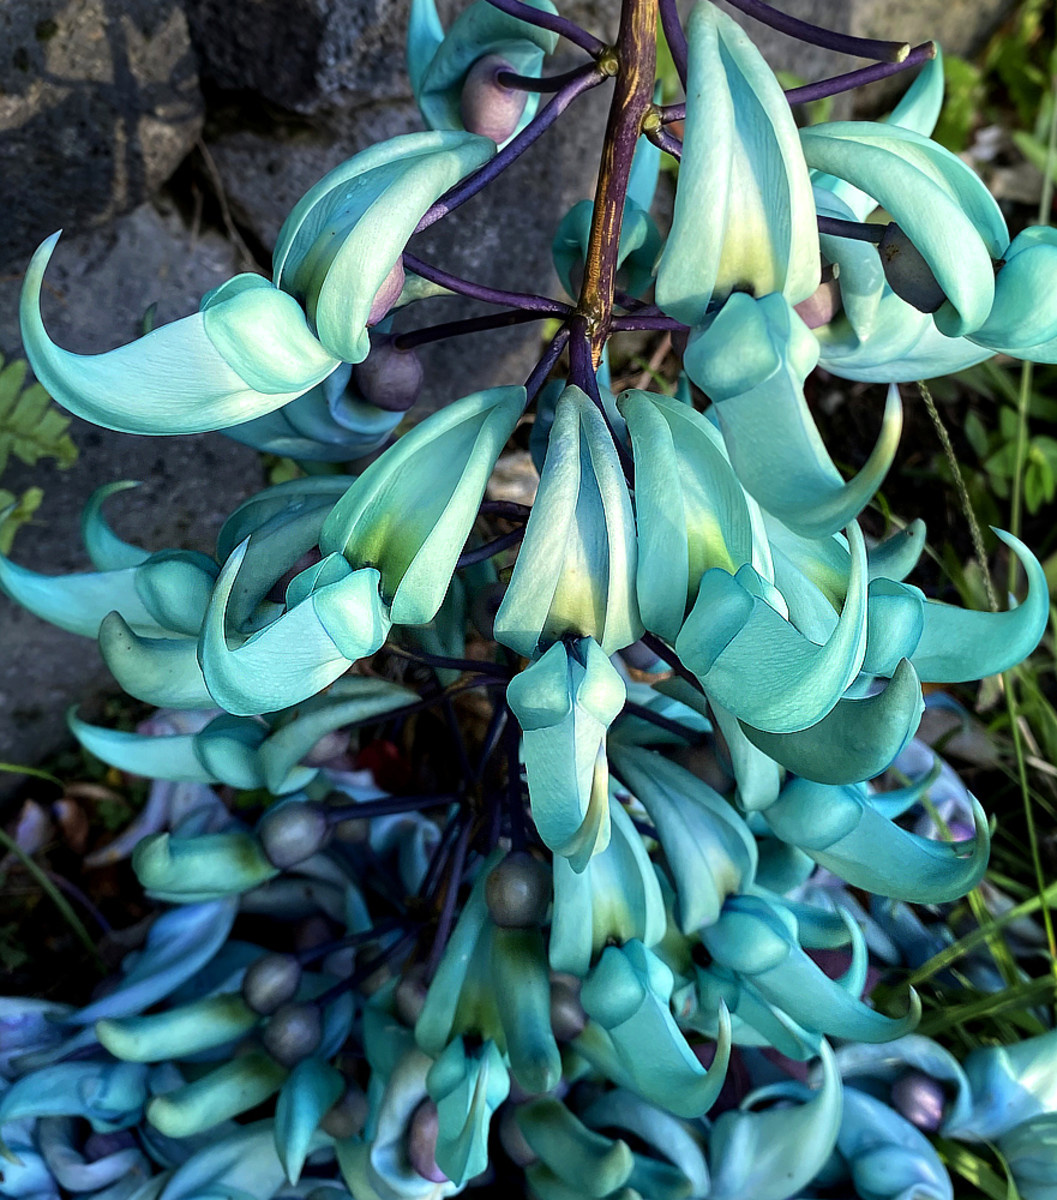 Sharp claws and hooks of a Blue Jade Vine flower cluster.